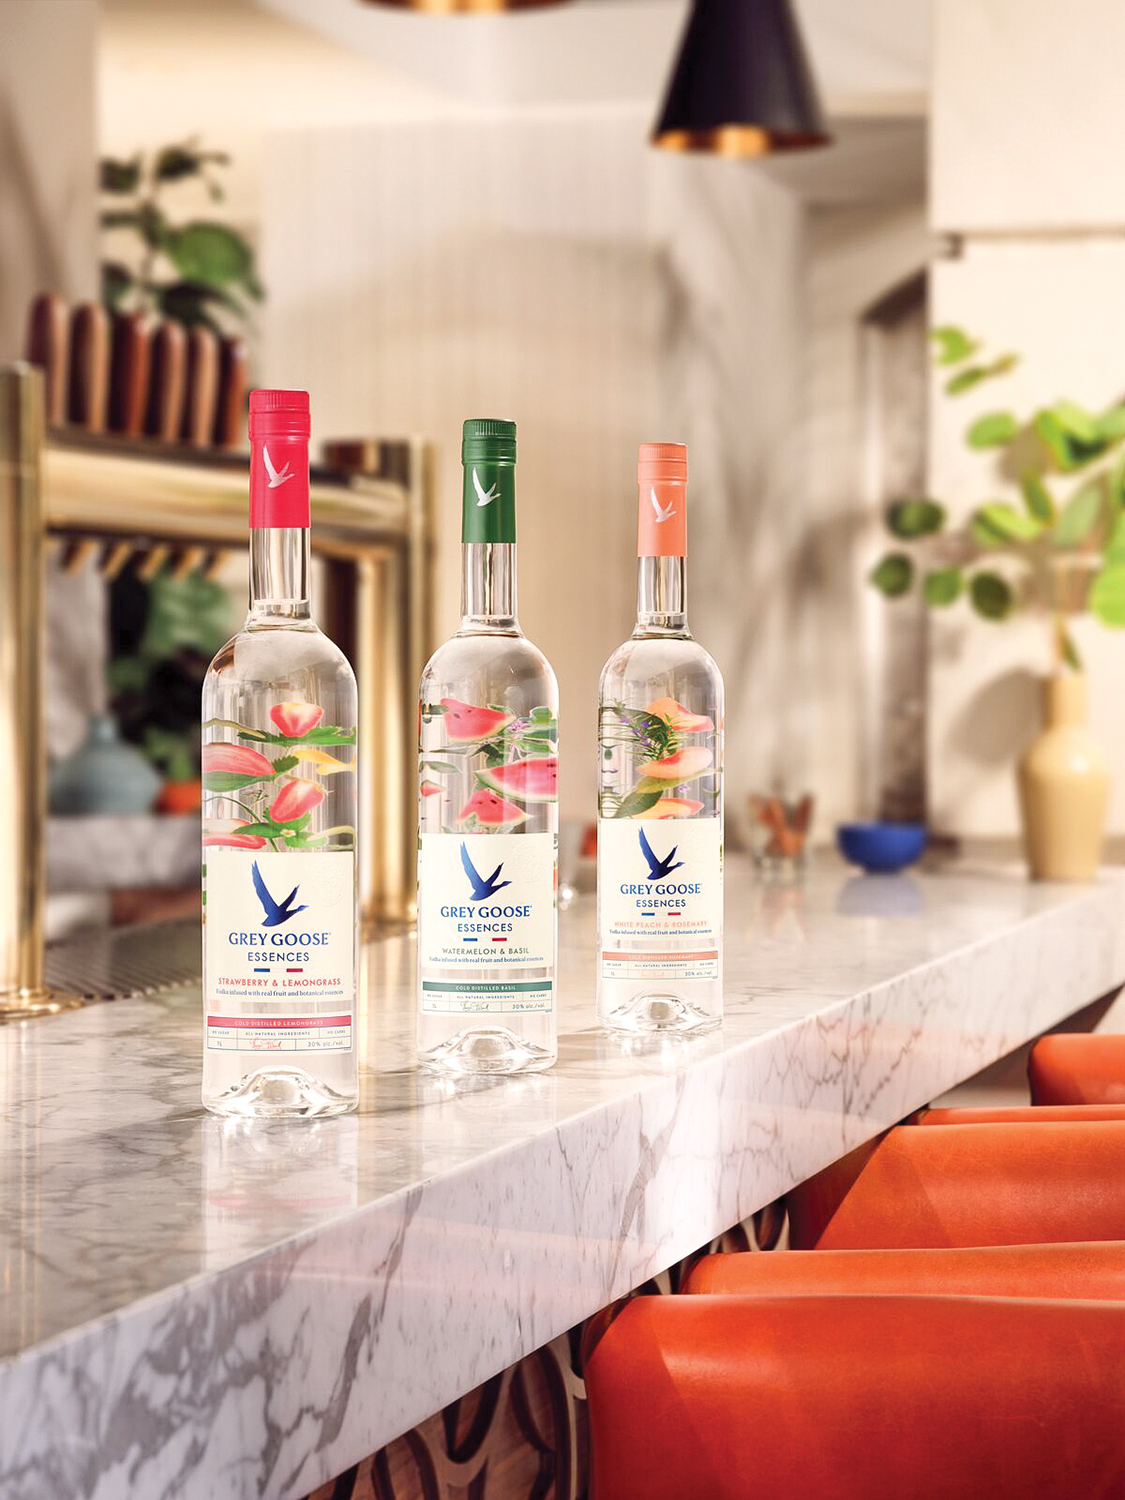 Belvedere launches new line of organic infusions